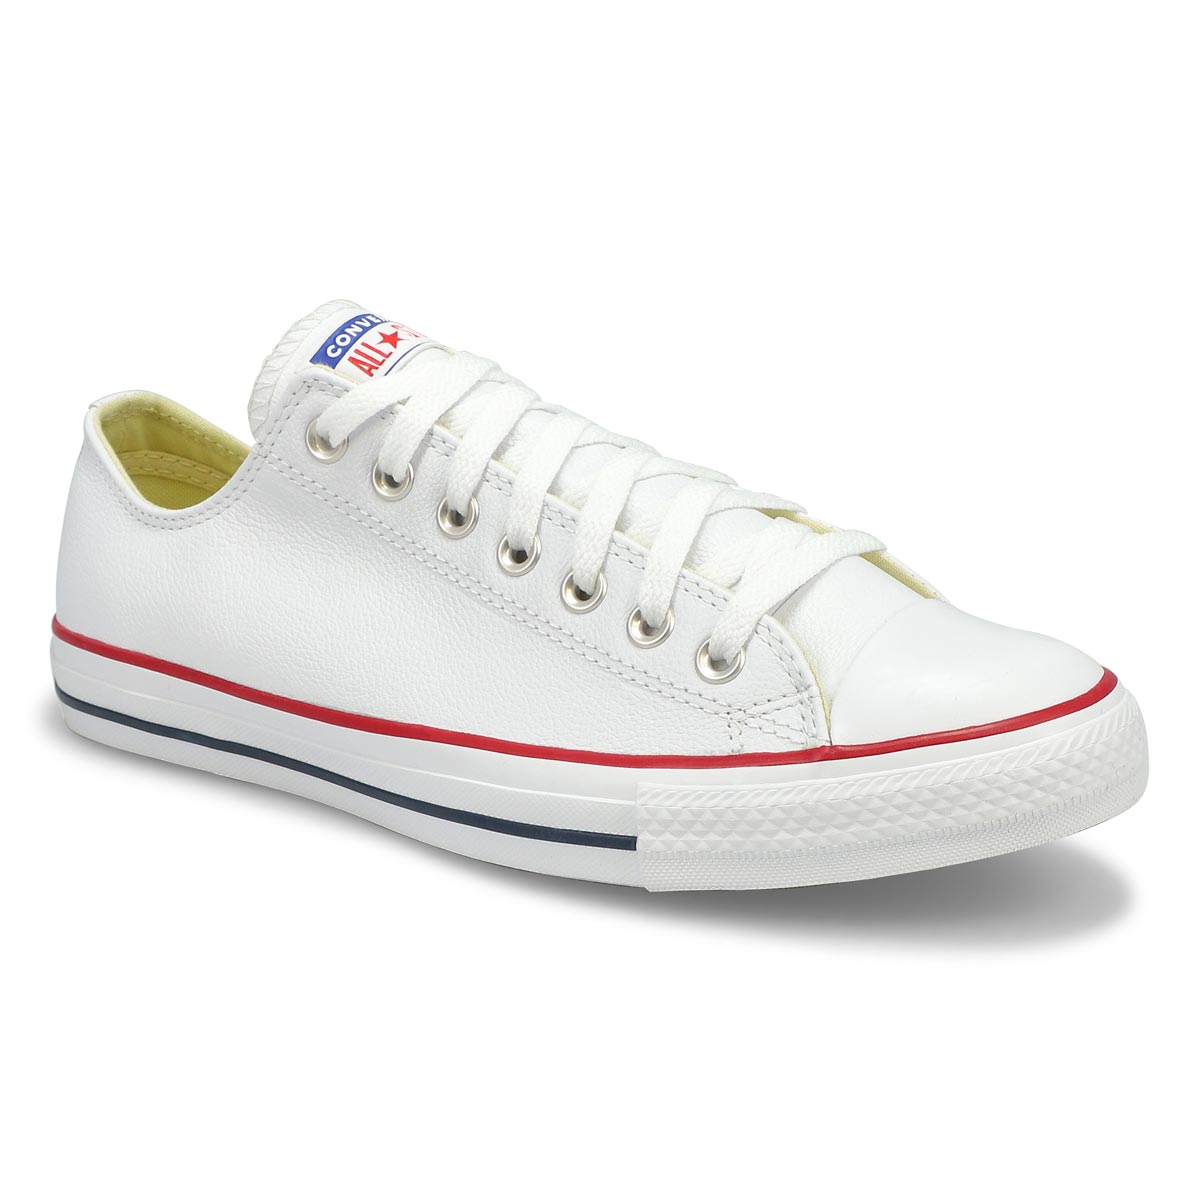  Converse All Star Chuck Taylor Ox Unisex Shoes Size 3, Color:  Red/White